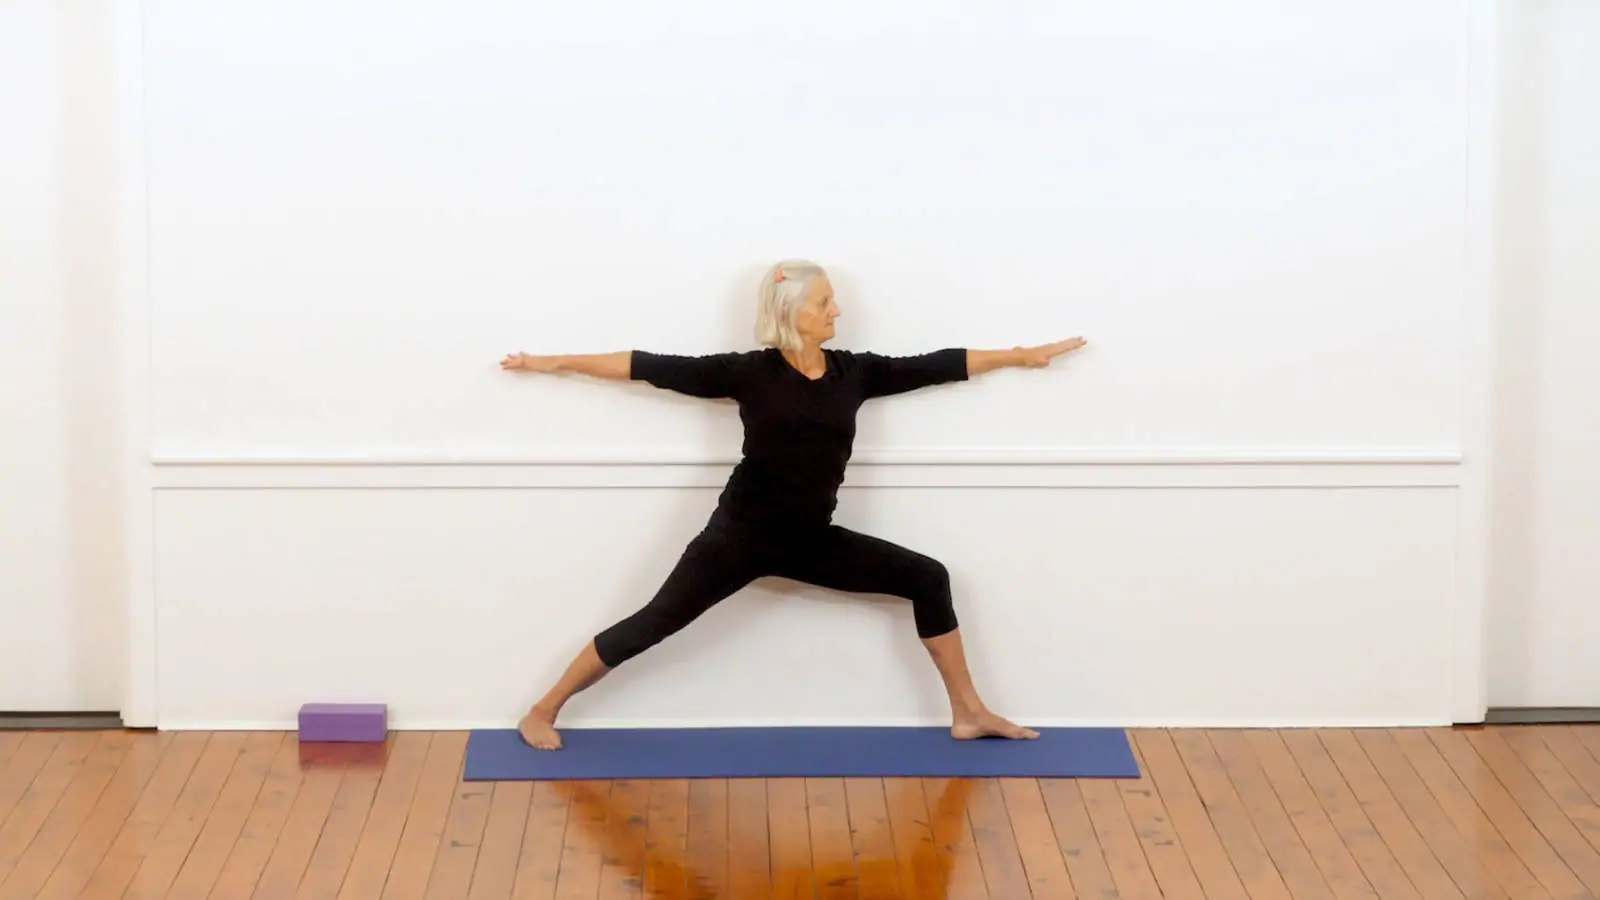 Is it safe to begin your yoga practice with seated poses?